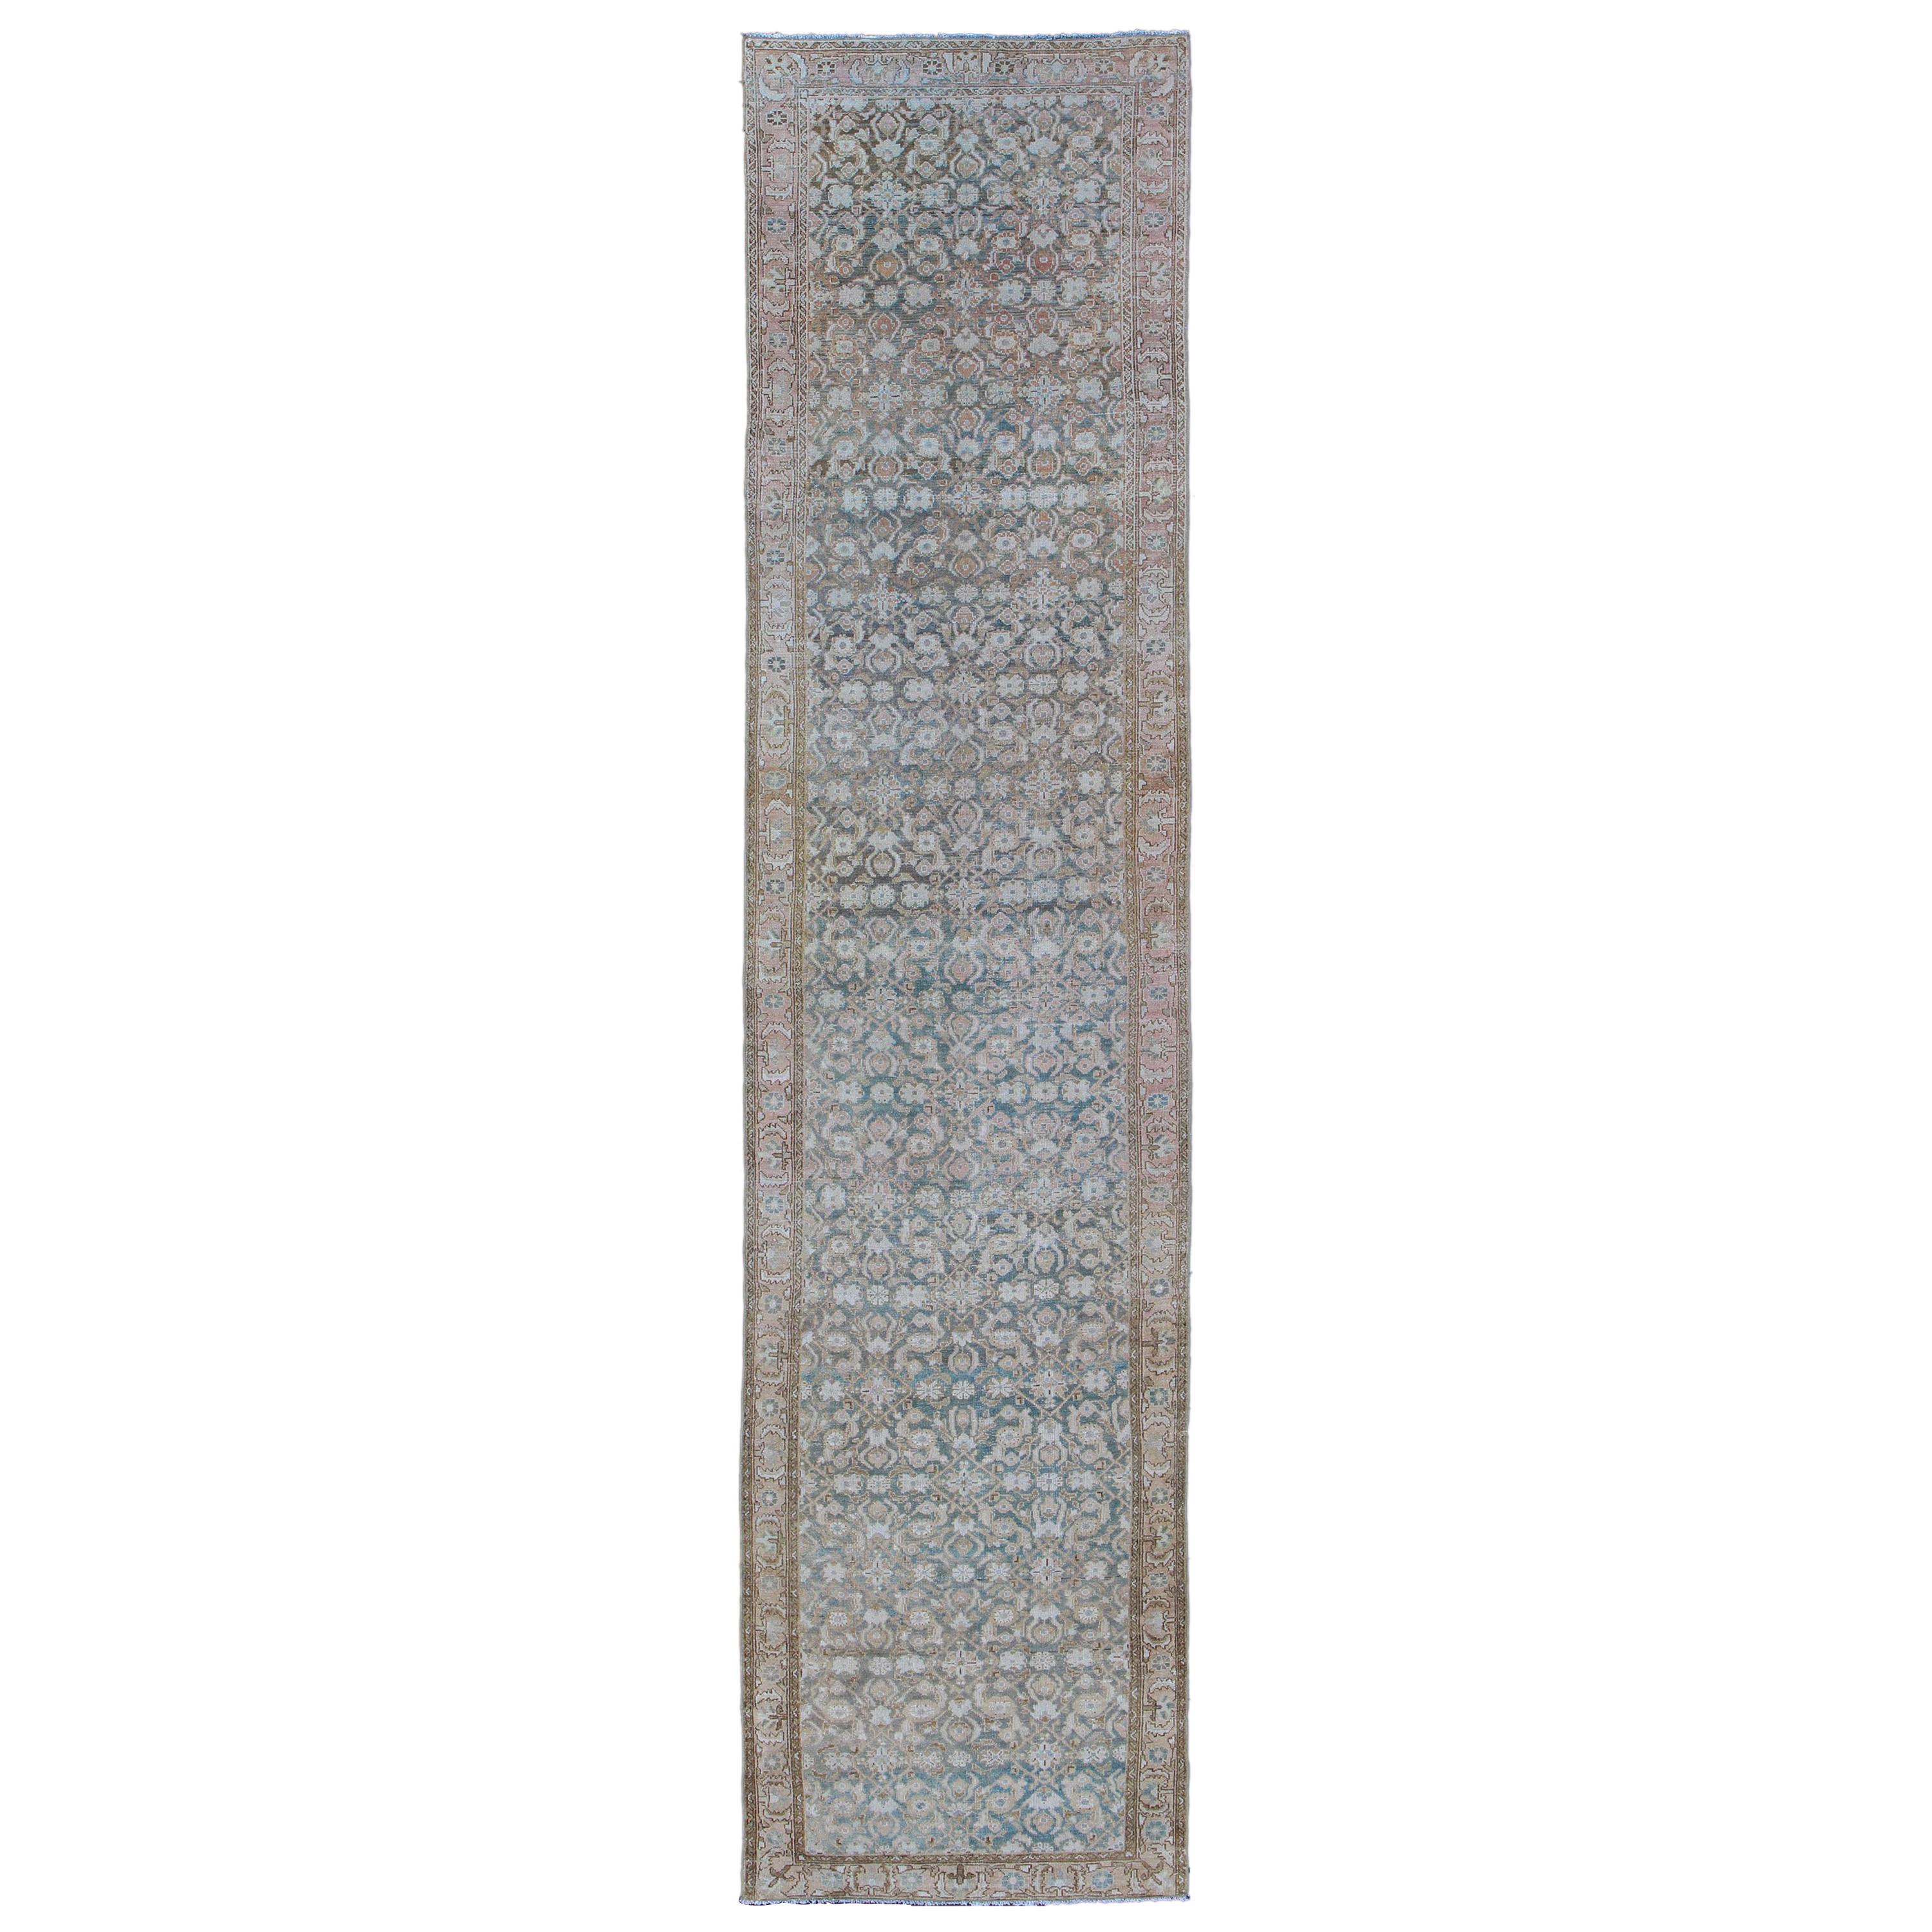 Blue Malayer Runner Antique Persian with Flowers in Light Tones